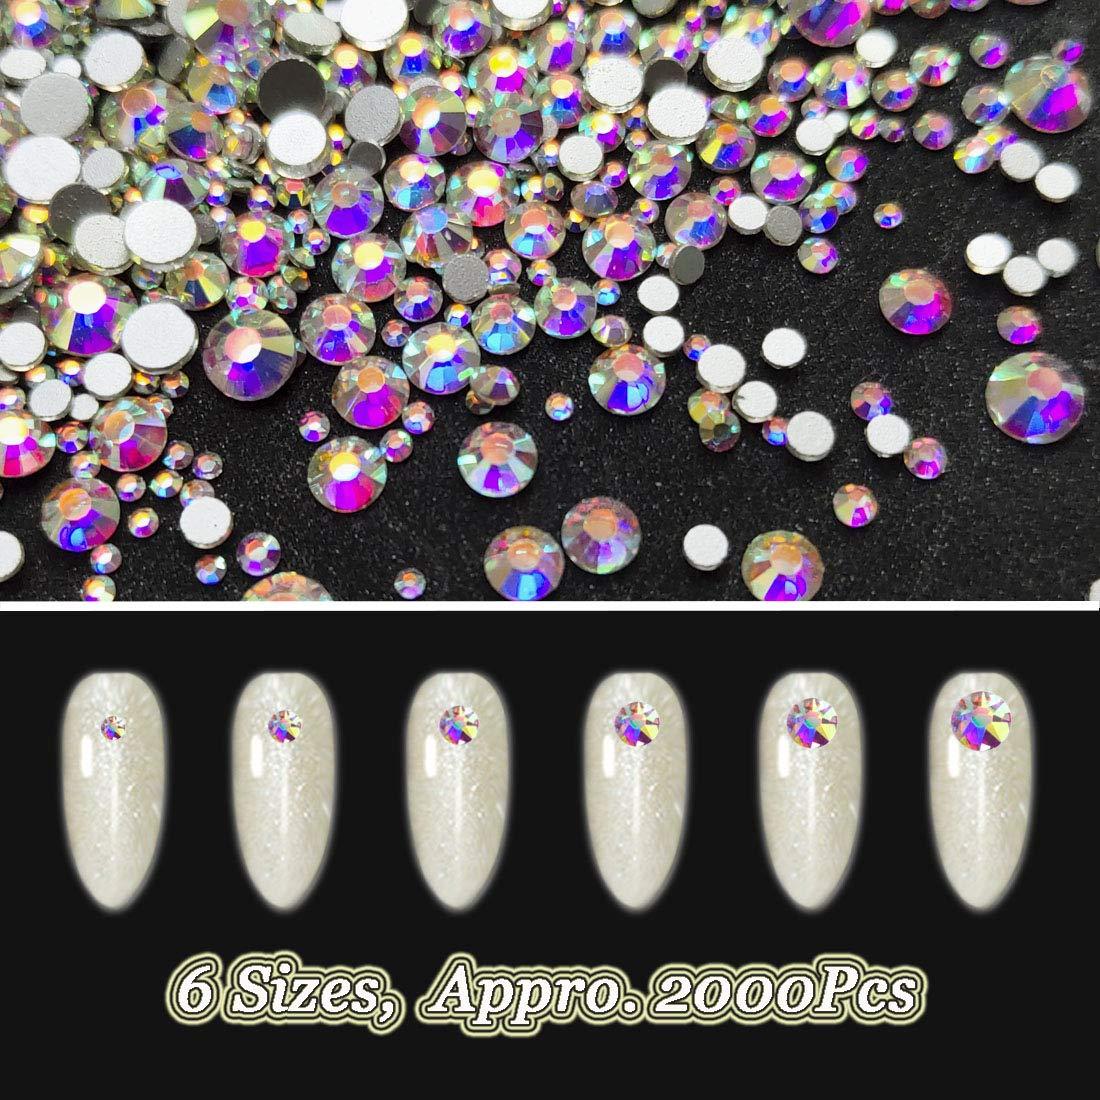 180+1728 Pcs Nail Rhinestones, AB Crystal Rhinestones for Nails, Flatback  Crystals with Mixed Shapes and Sizes for Nail Art, Clothes, Jewelry AB 180